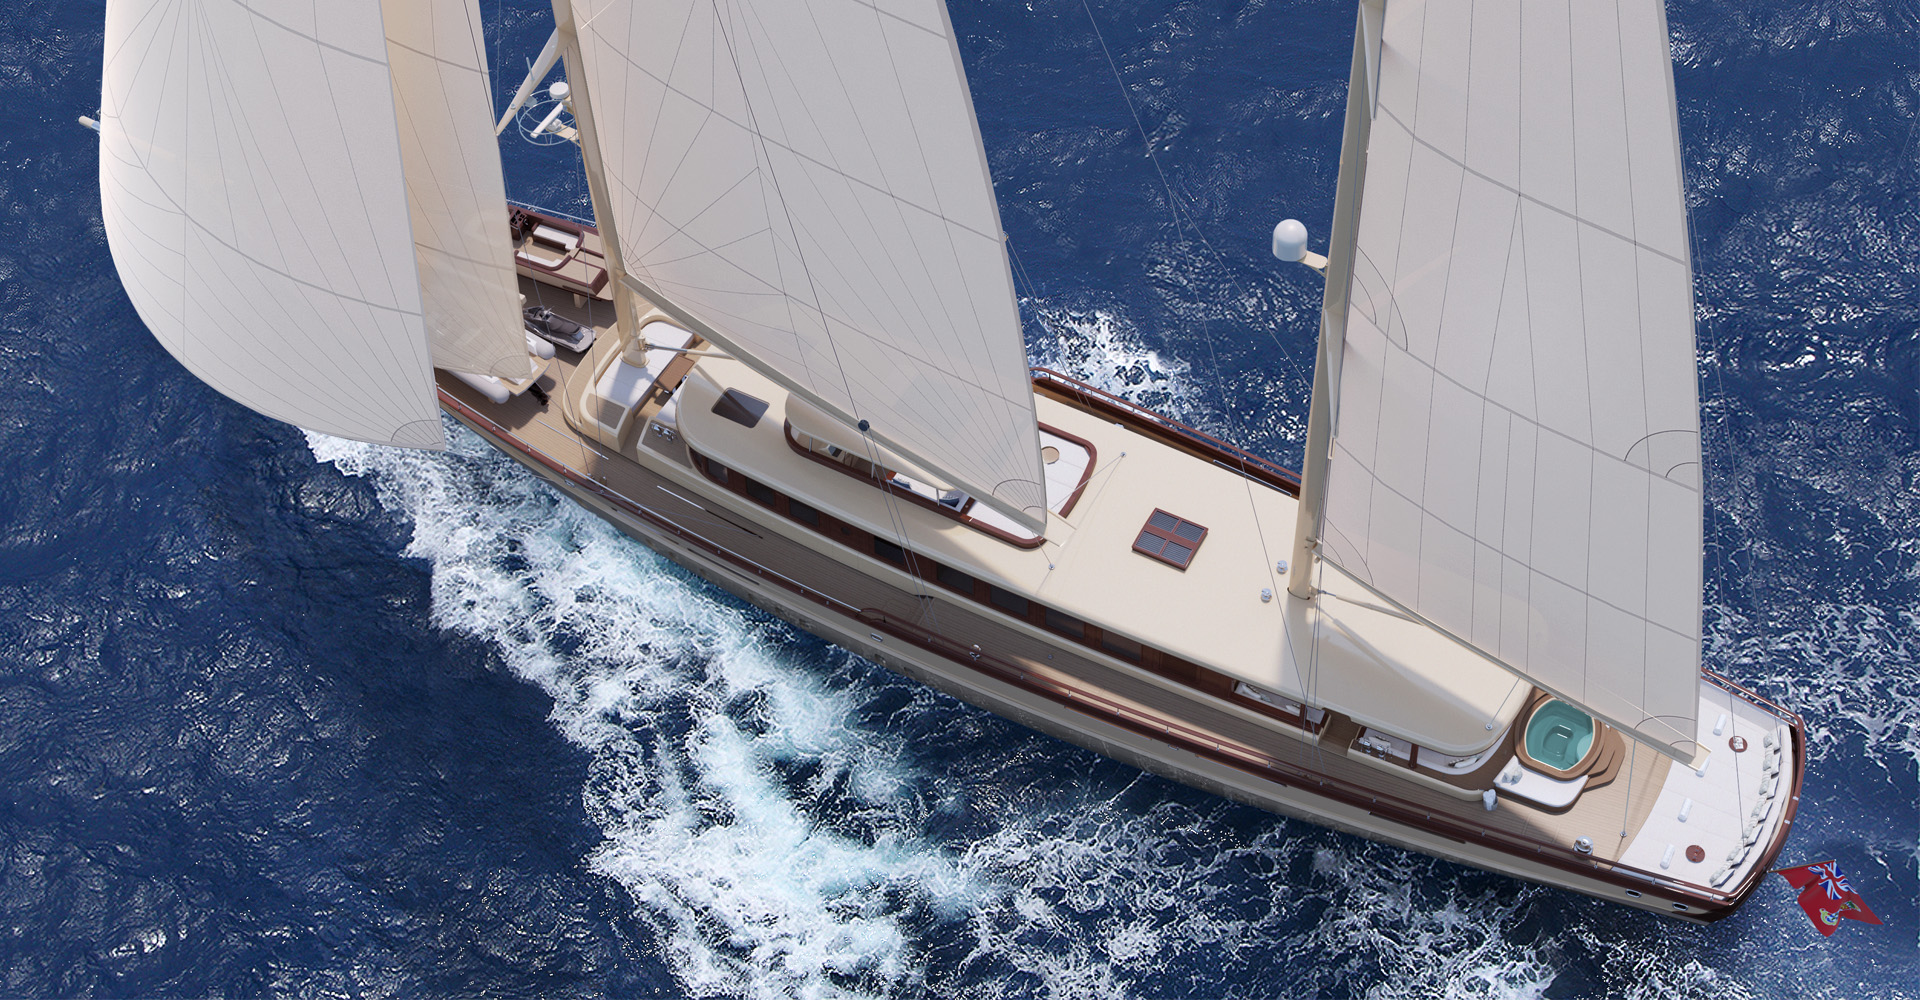 Simena sailing yacht in build at Ares Yachts